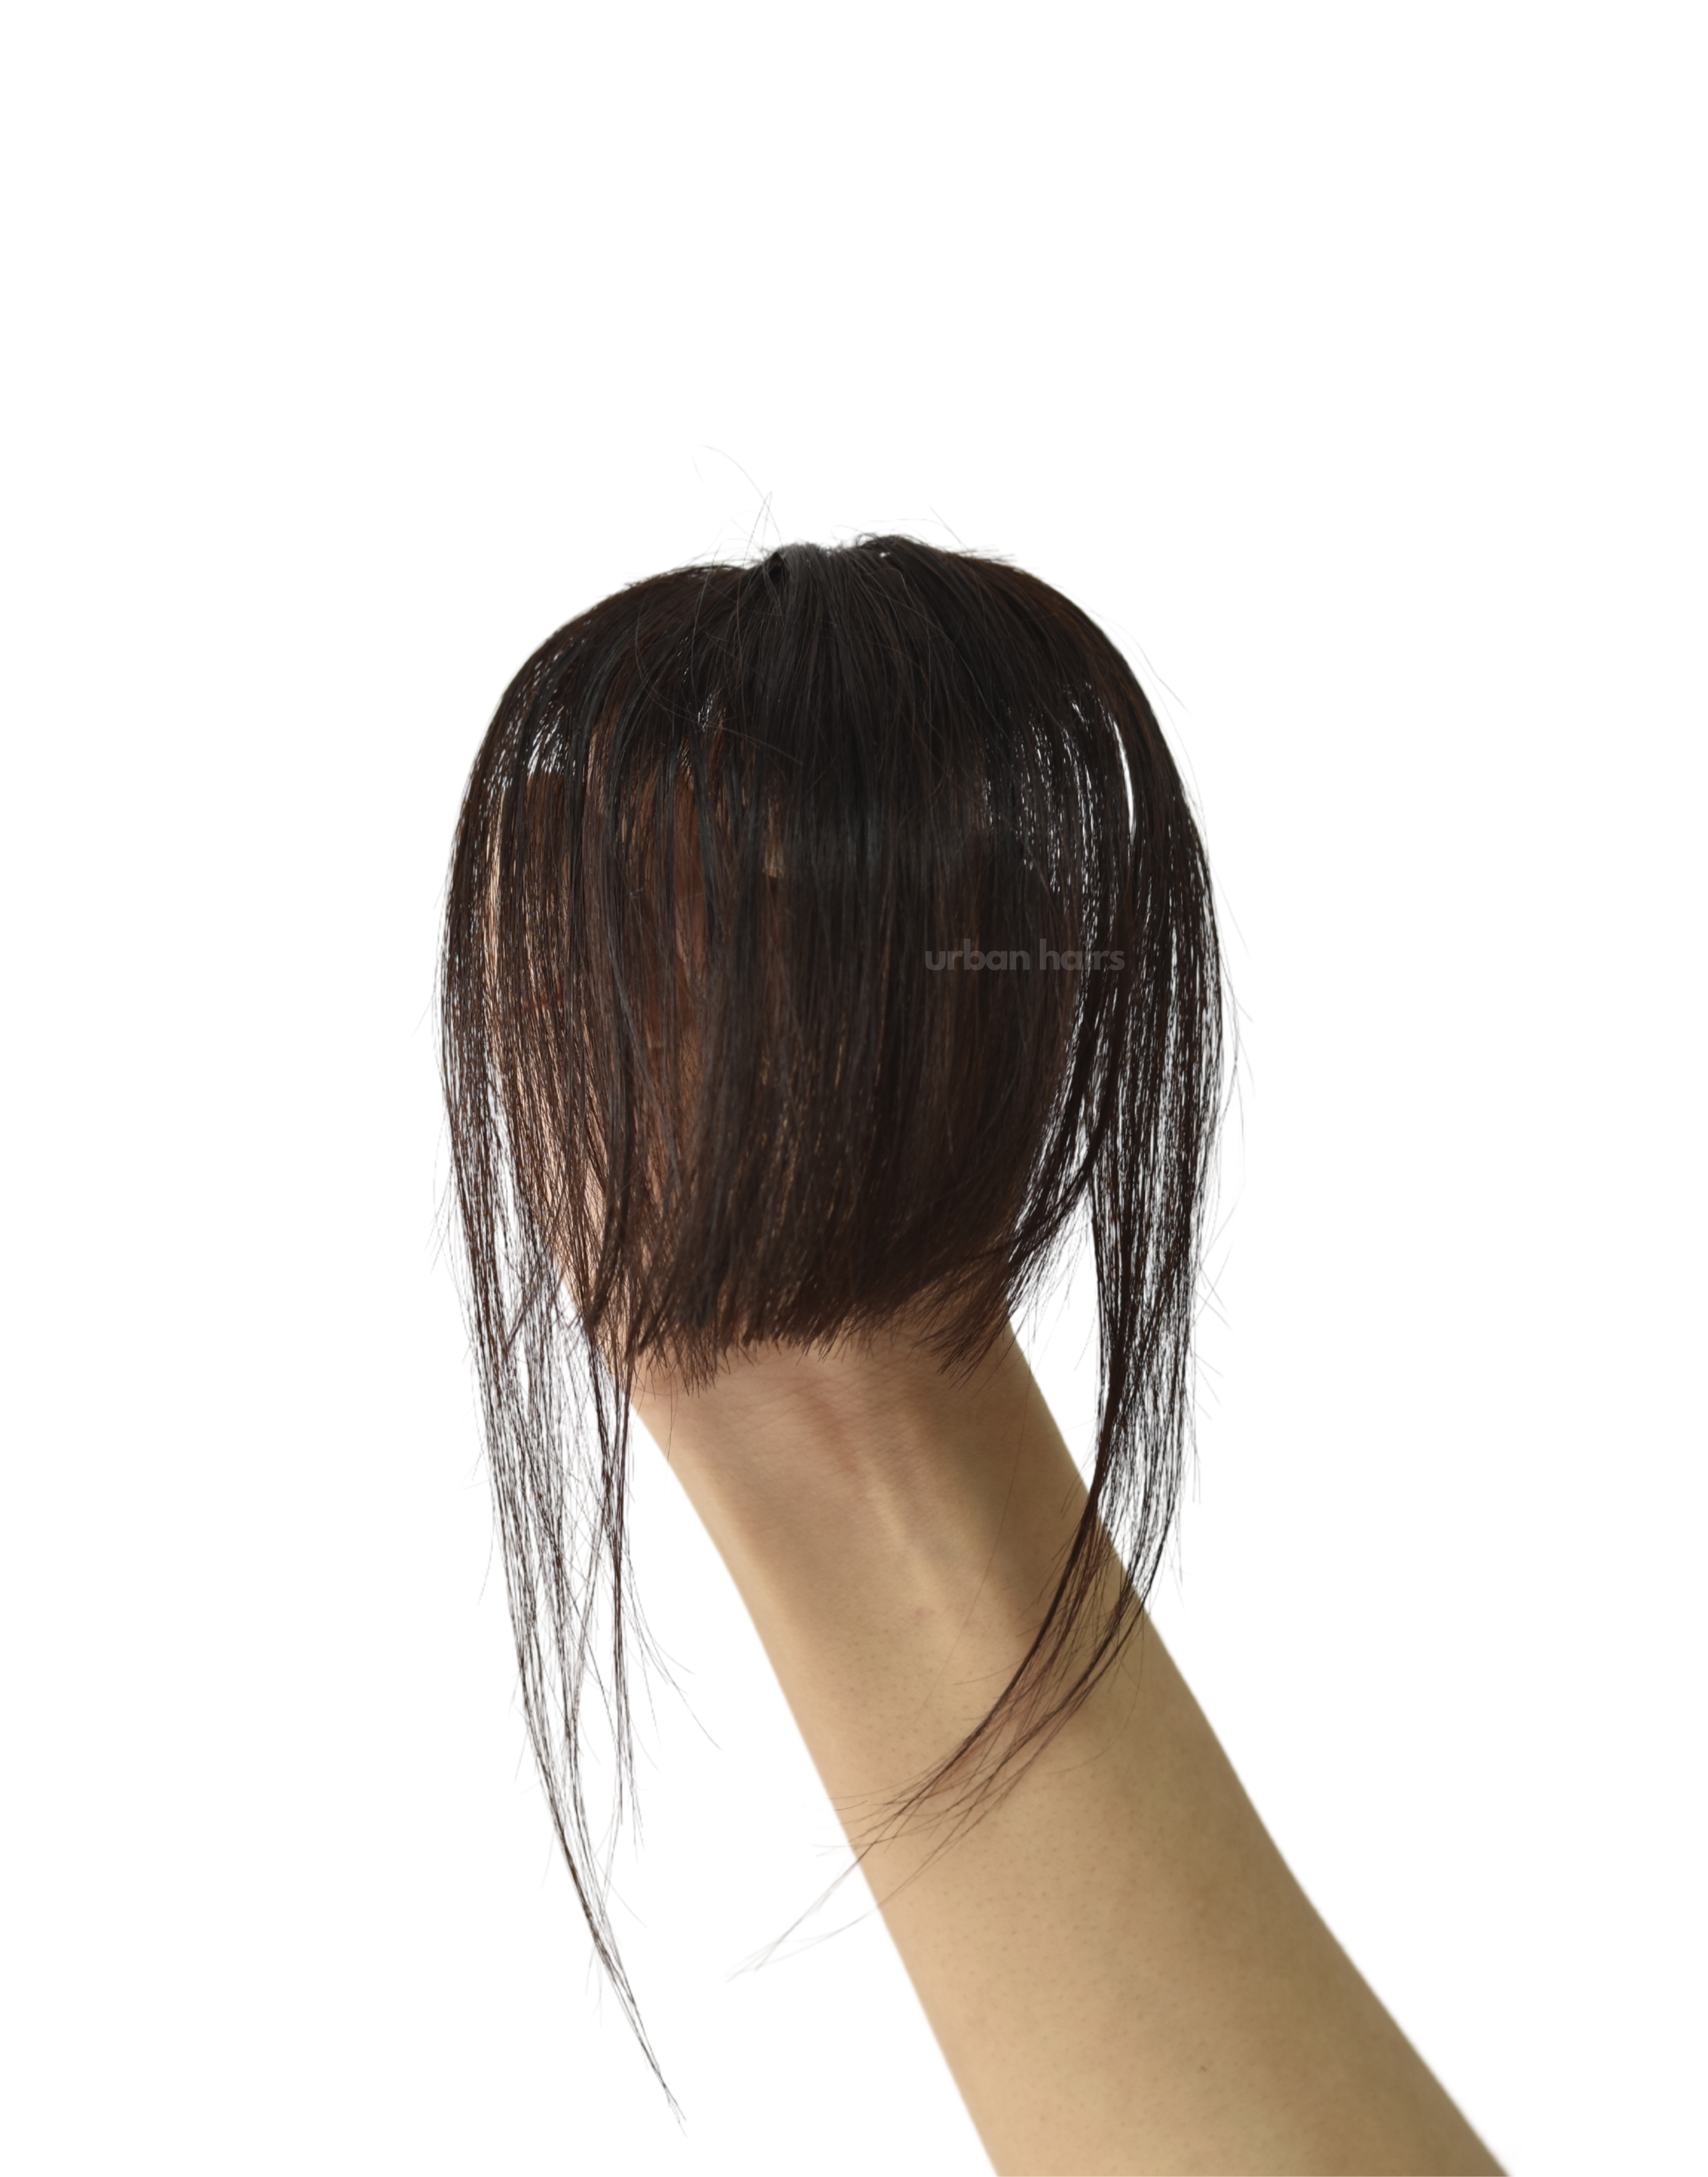 Korean Bangs | 100% Original Human Hair  | Easy to use &amp; Fix with Clips